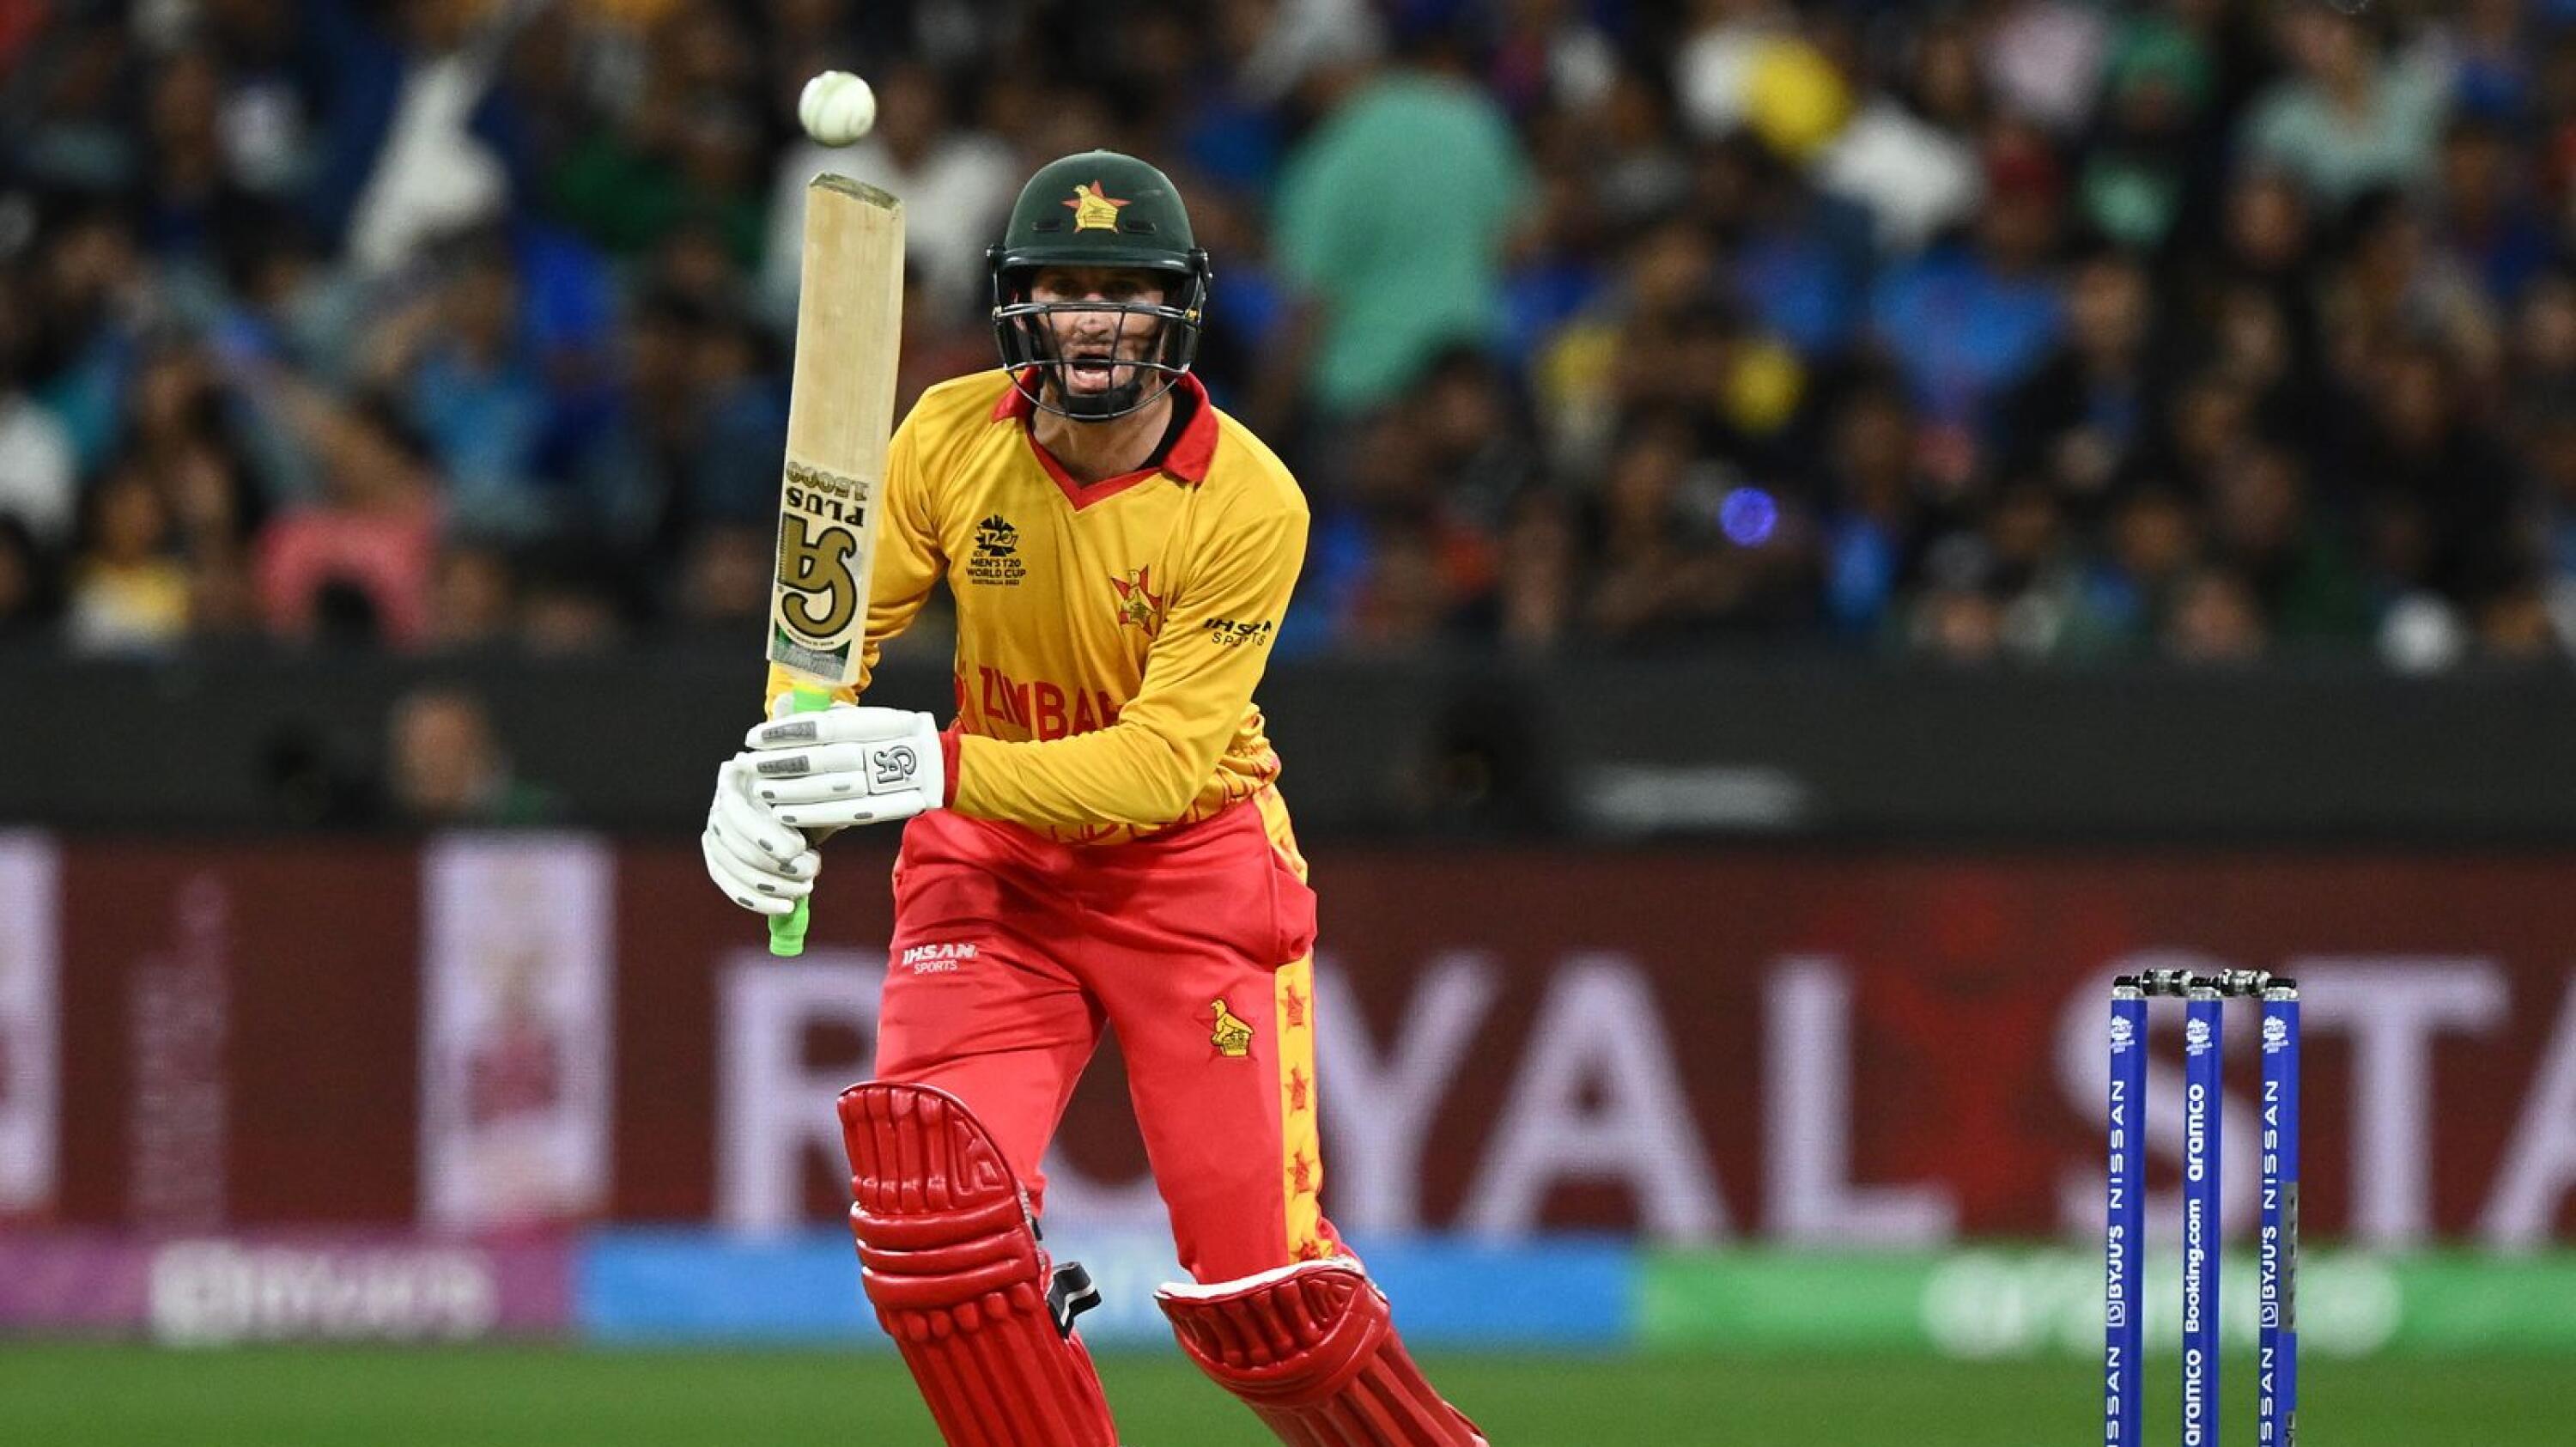 Sean Williams of Zimbabwe bats during the ICC Men’s T20 World Cup 2022 Super 12 cricket match between India and Zimbabwe at the Melbourne Cricket Ground in Melbourne, Australia,